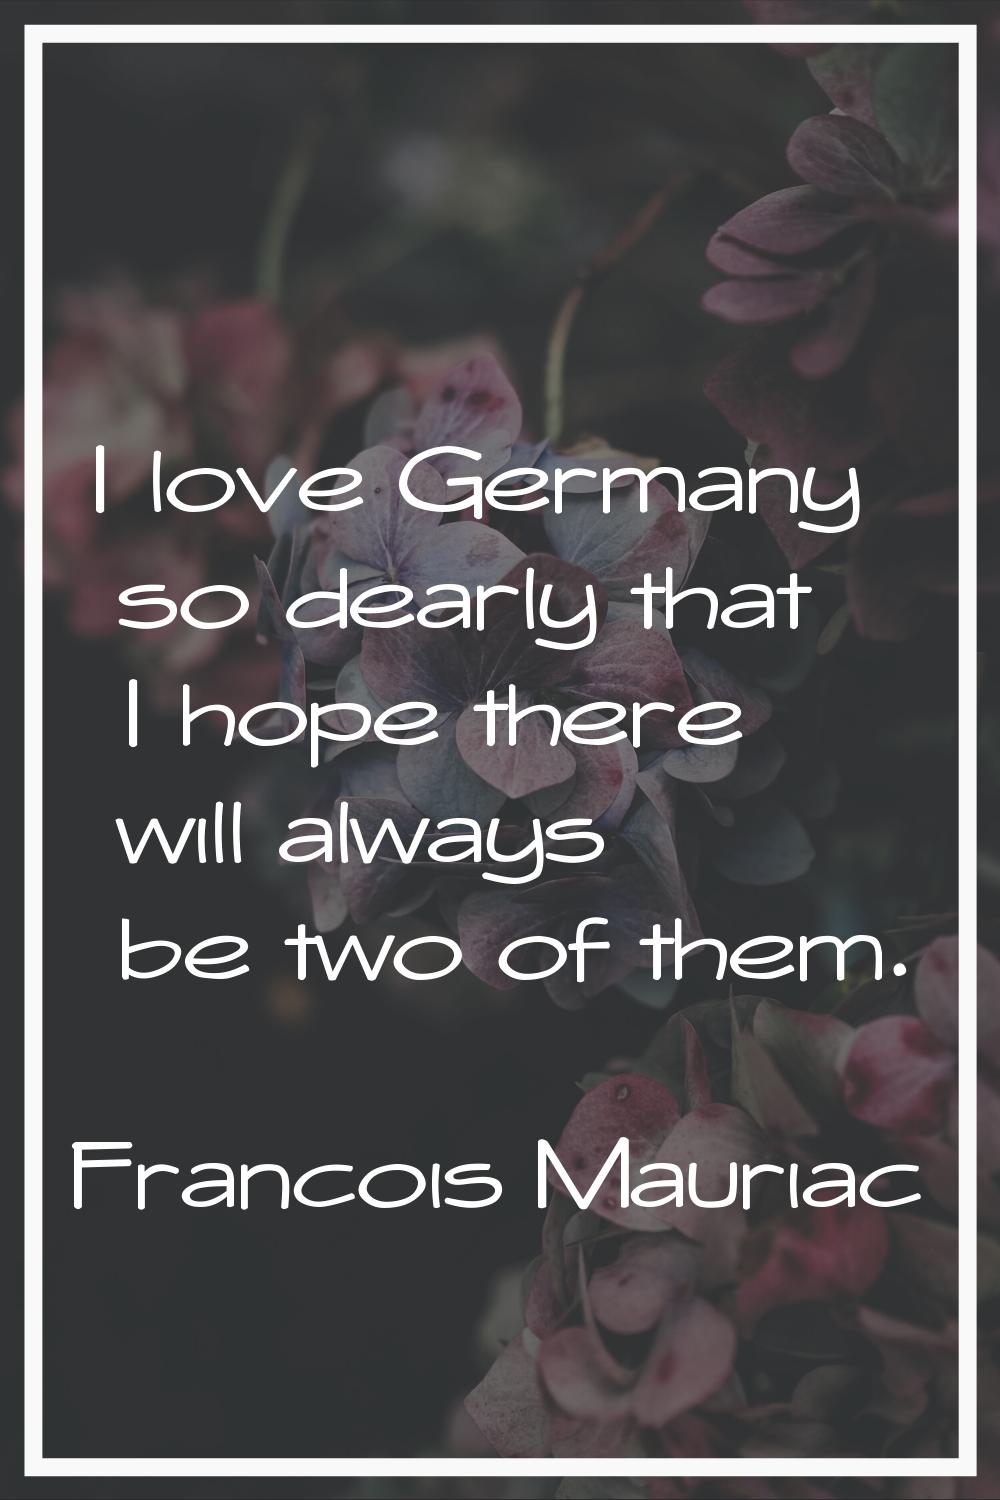 I love Germany so dearly that I hope there will always be two of them.